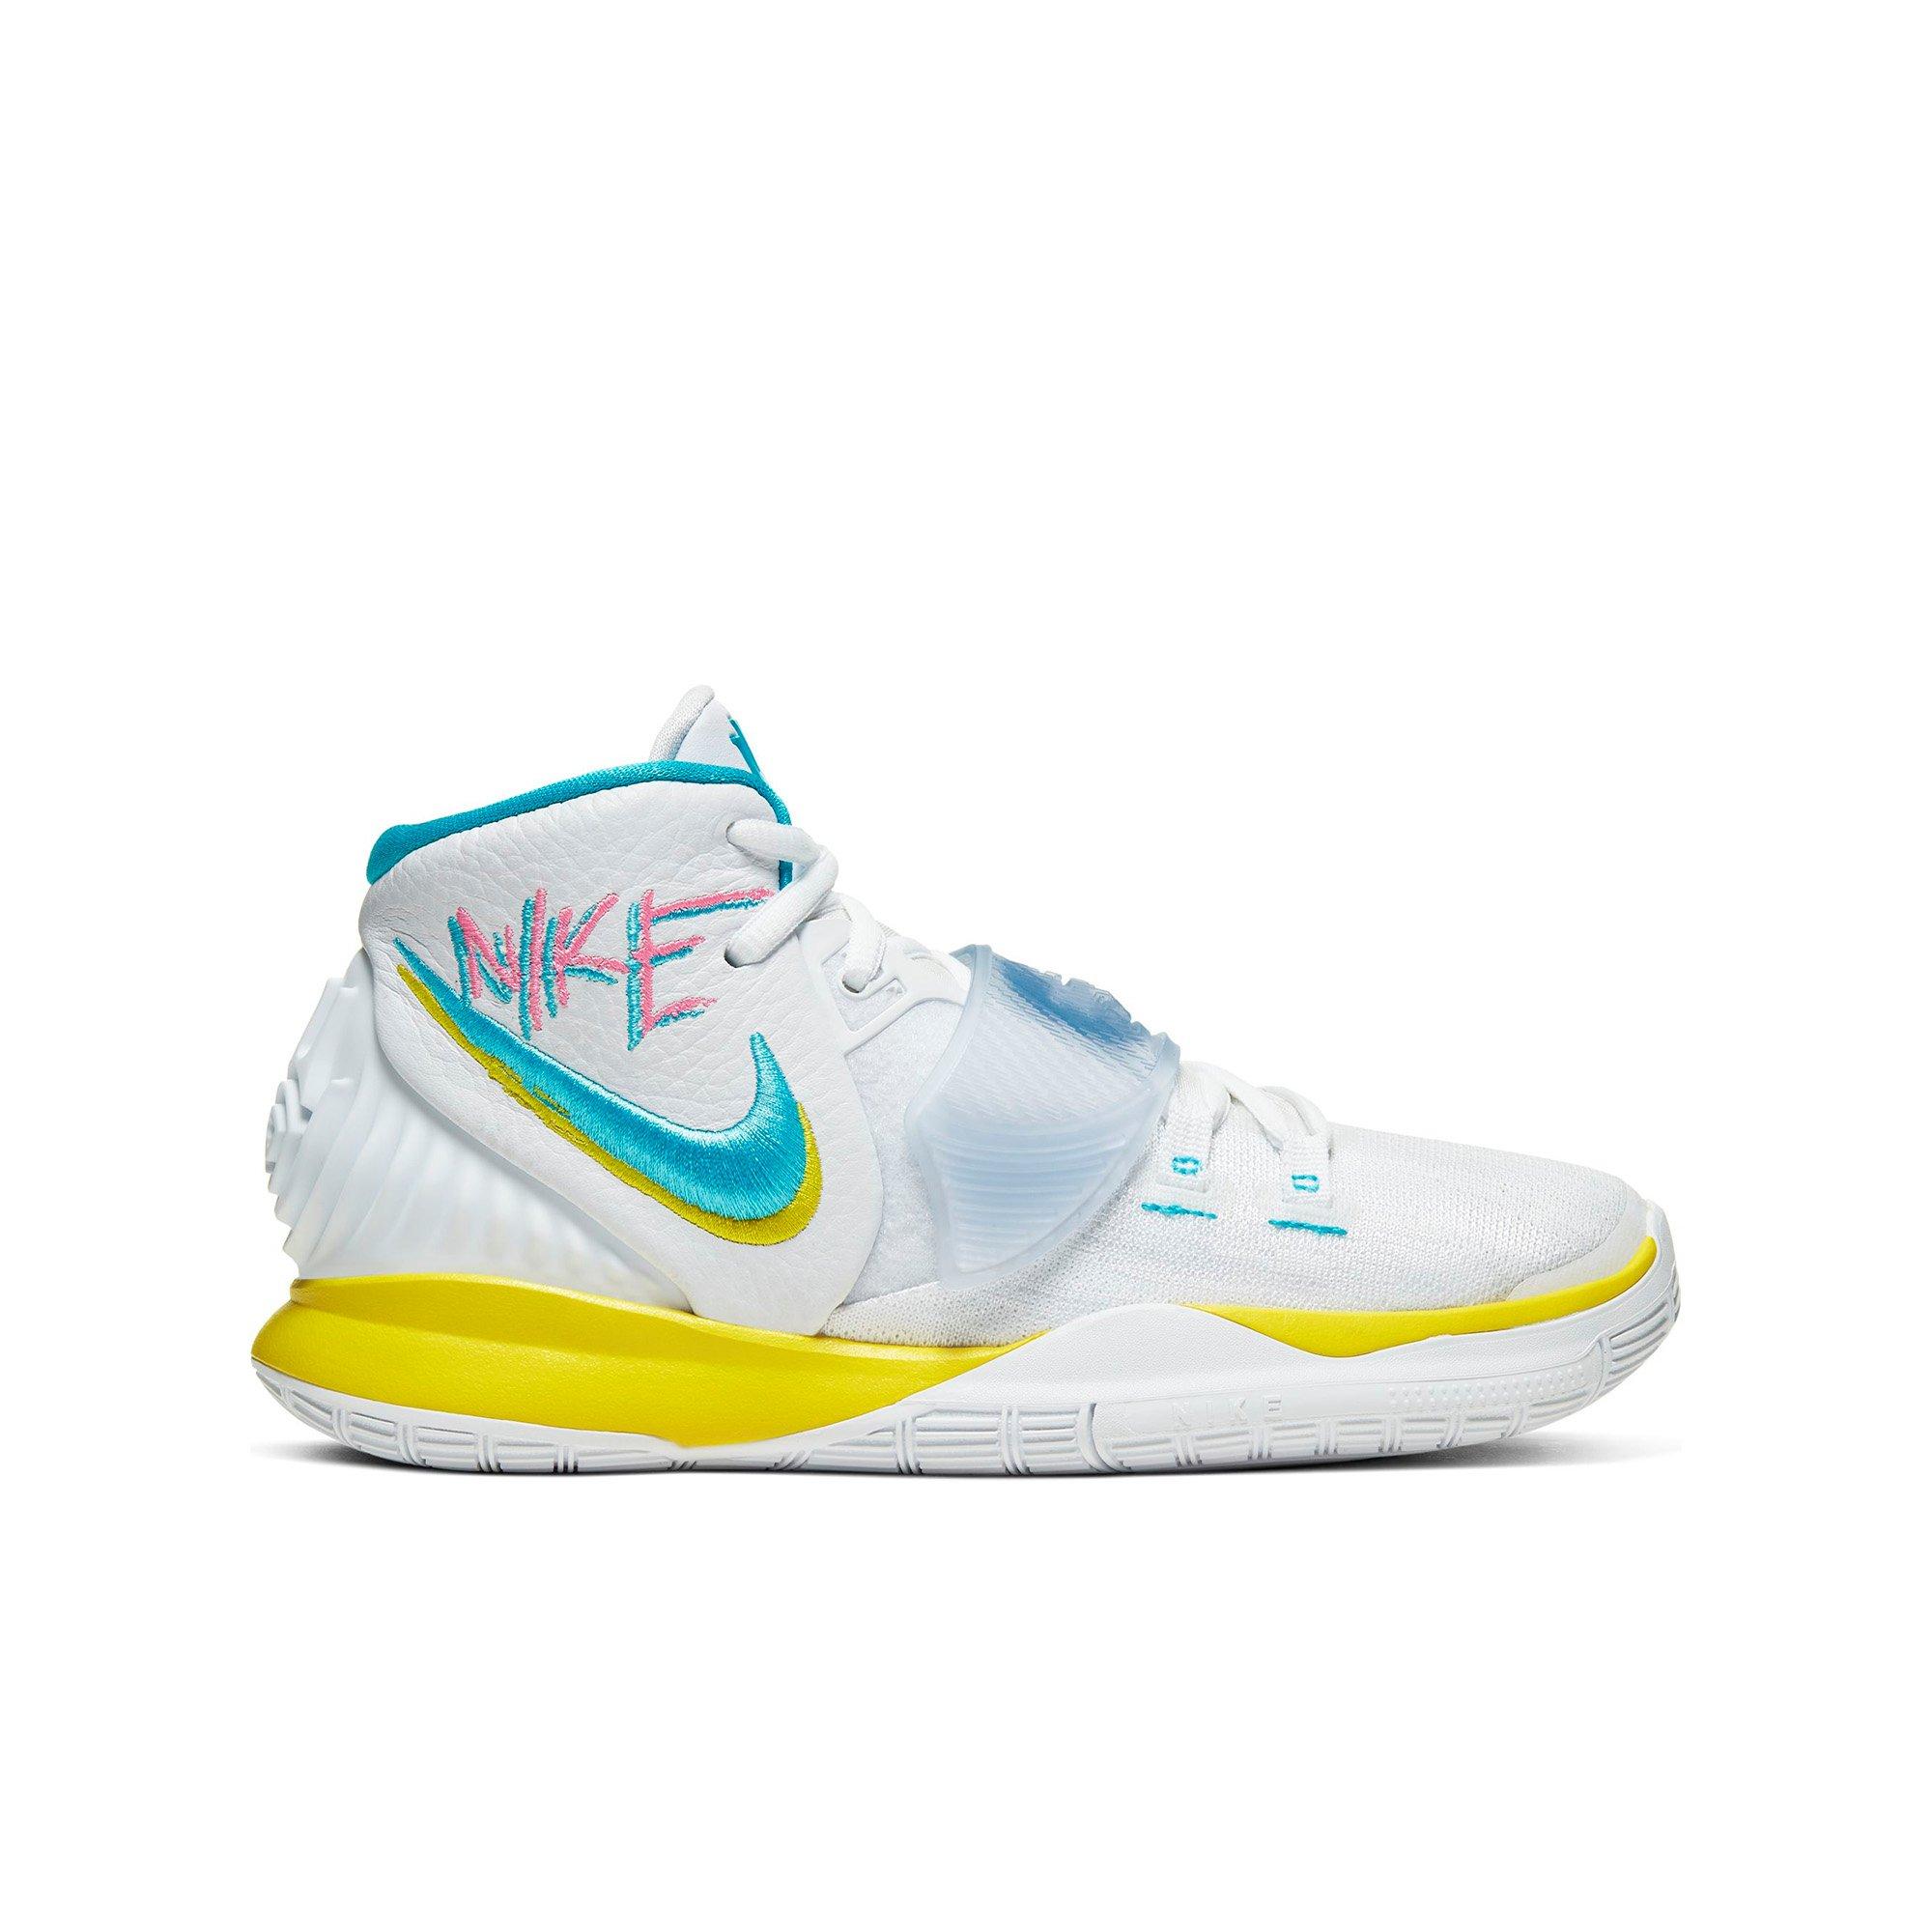 kyrie 5 blue and yellow